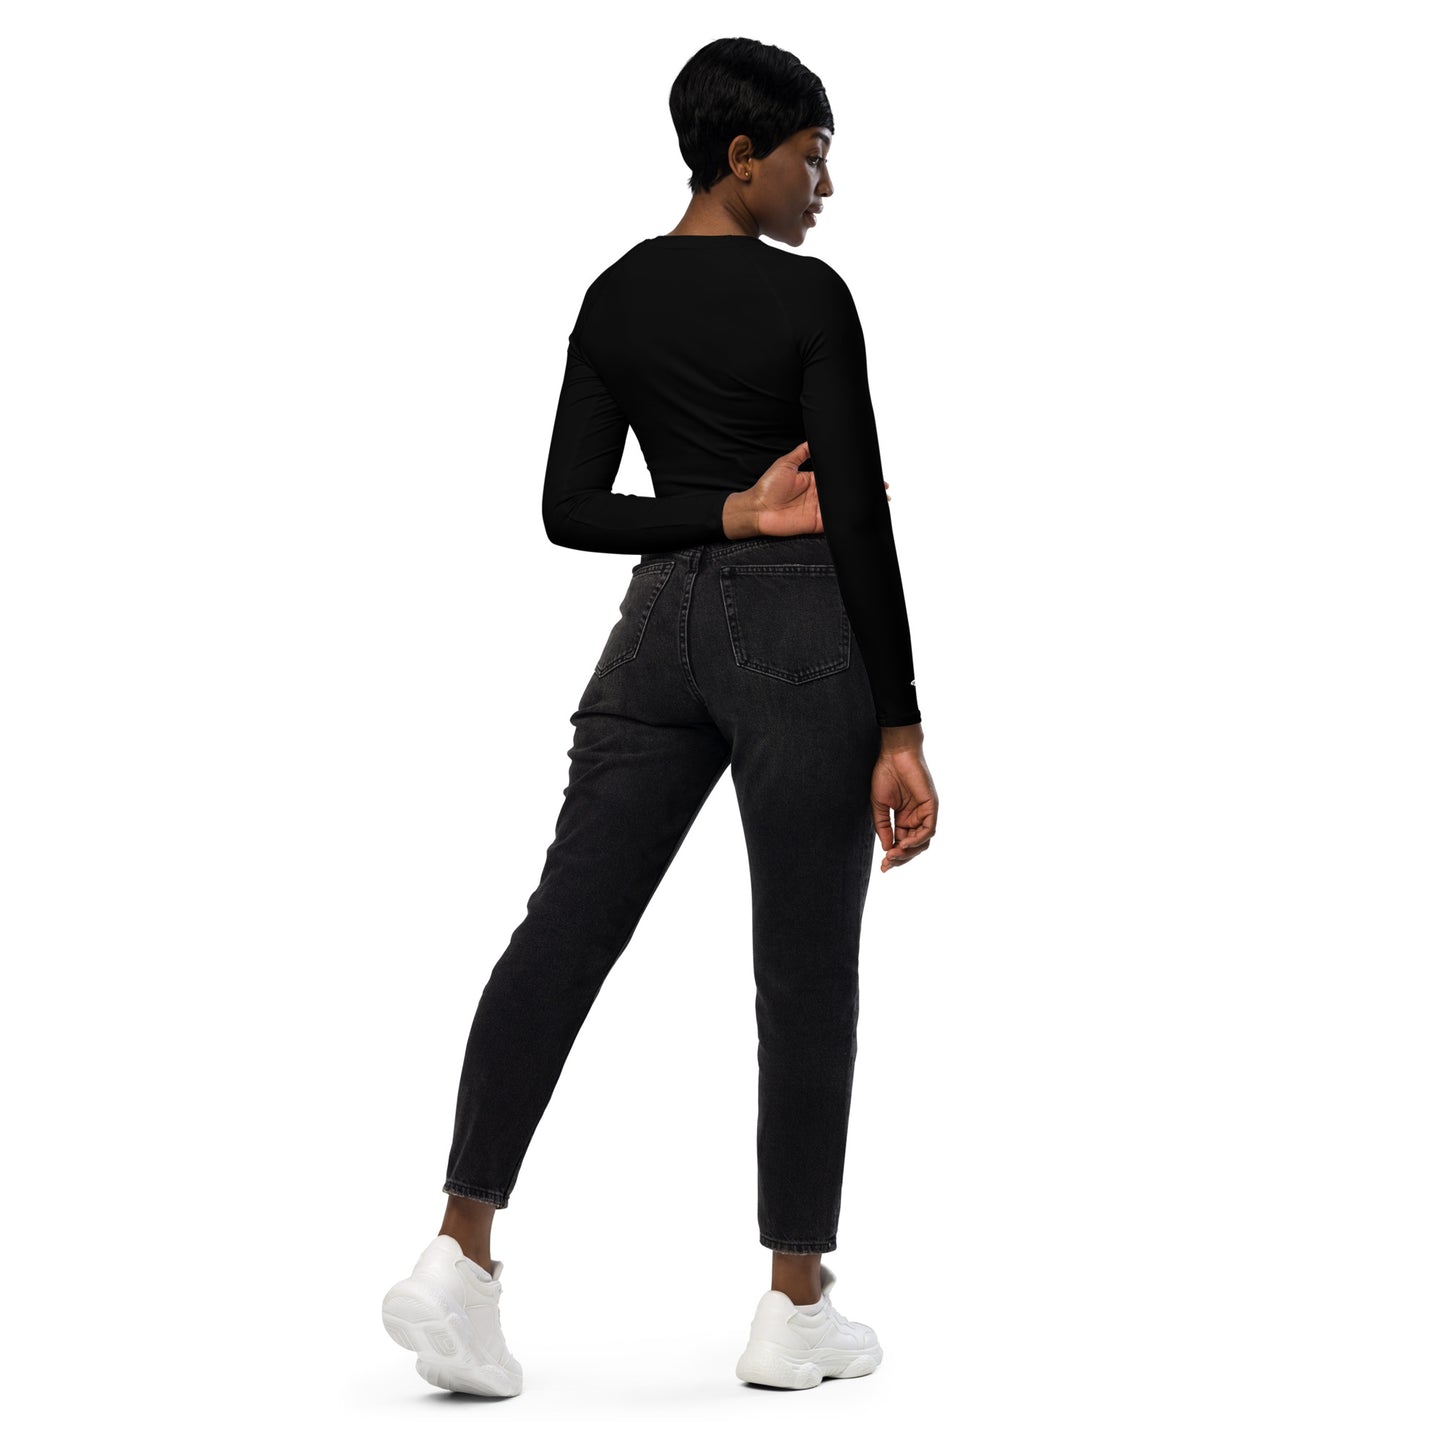 Classic Black Recycled Long-Sleeve UPF 50+ Crop Top